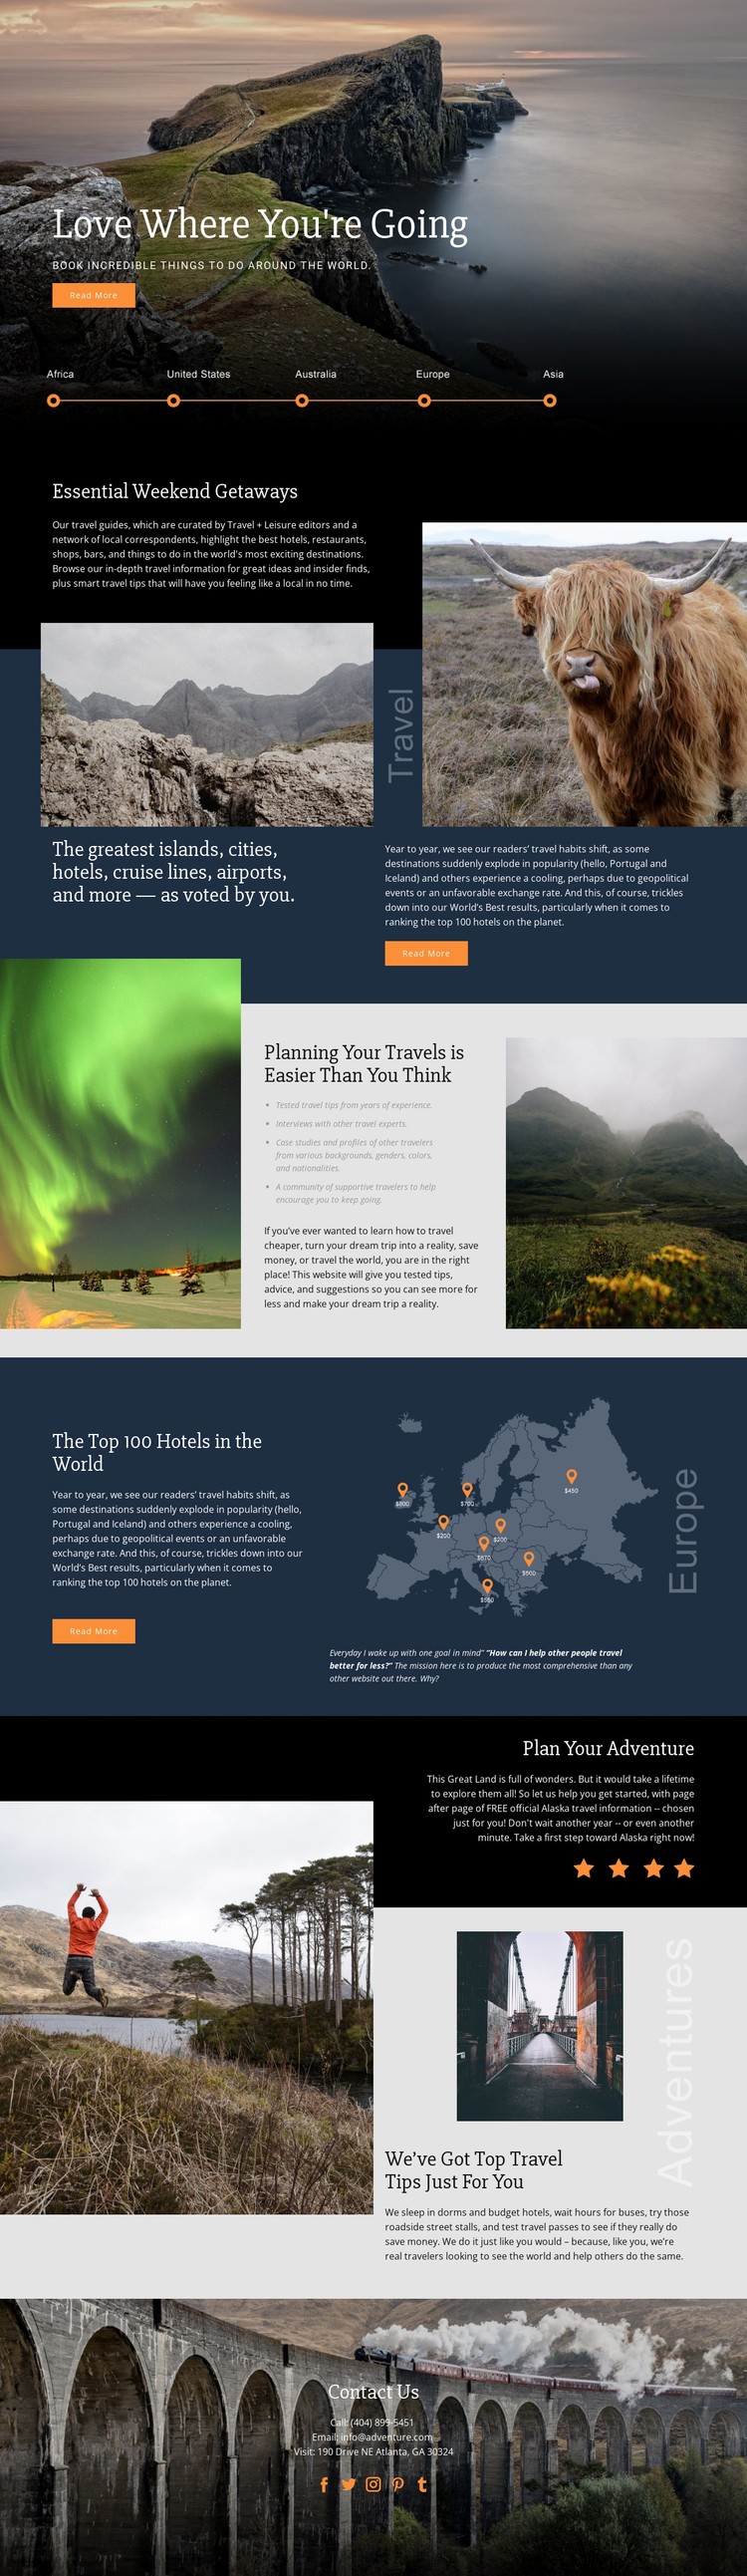 Planning Your Travel Static Site Generator